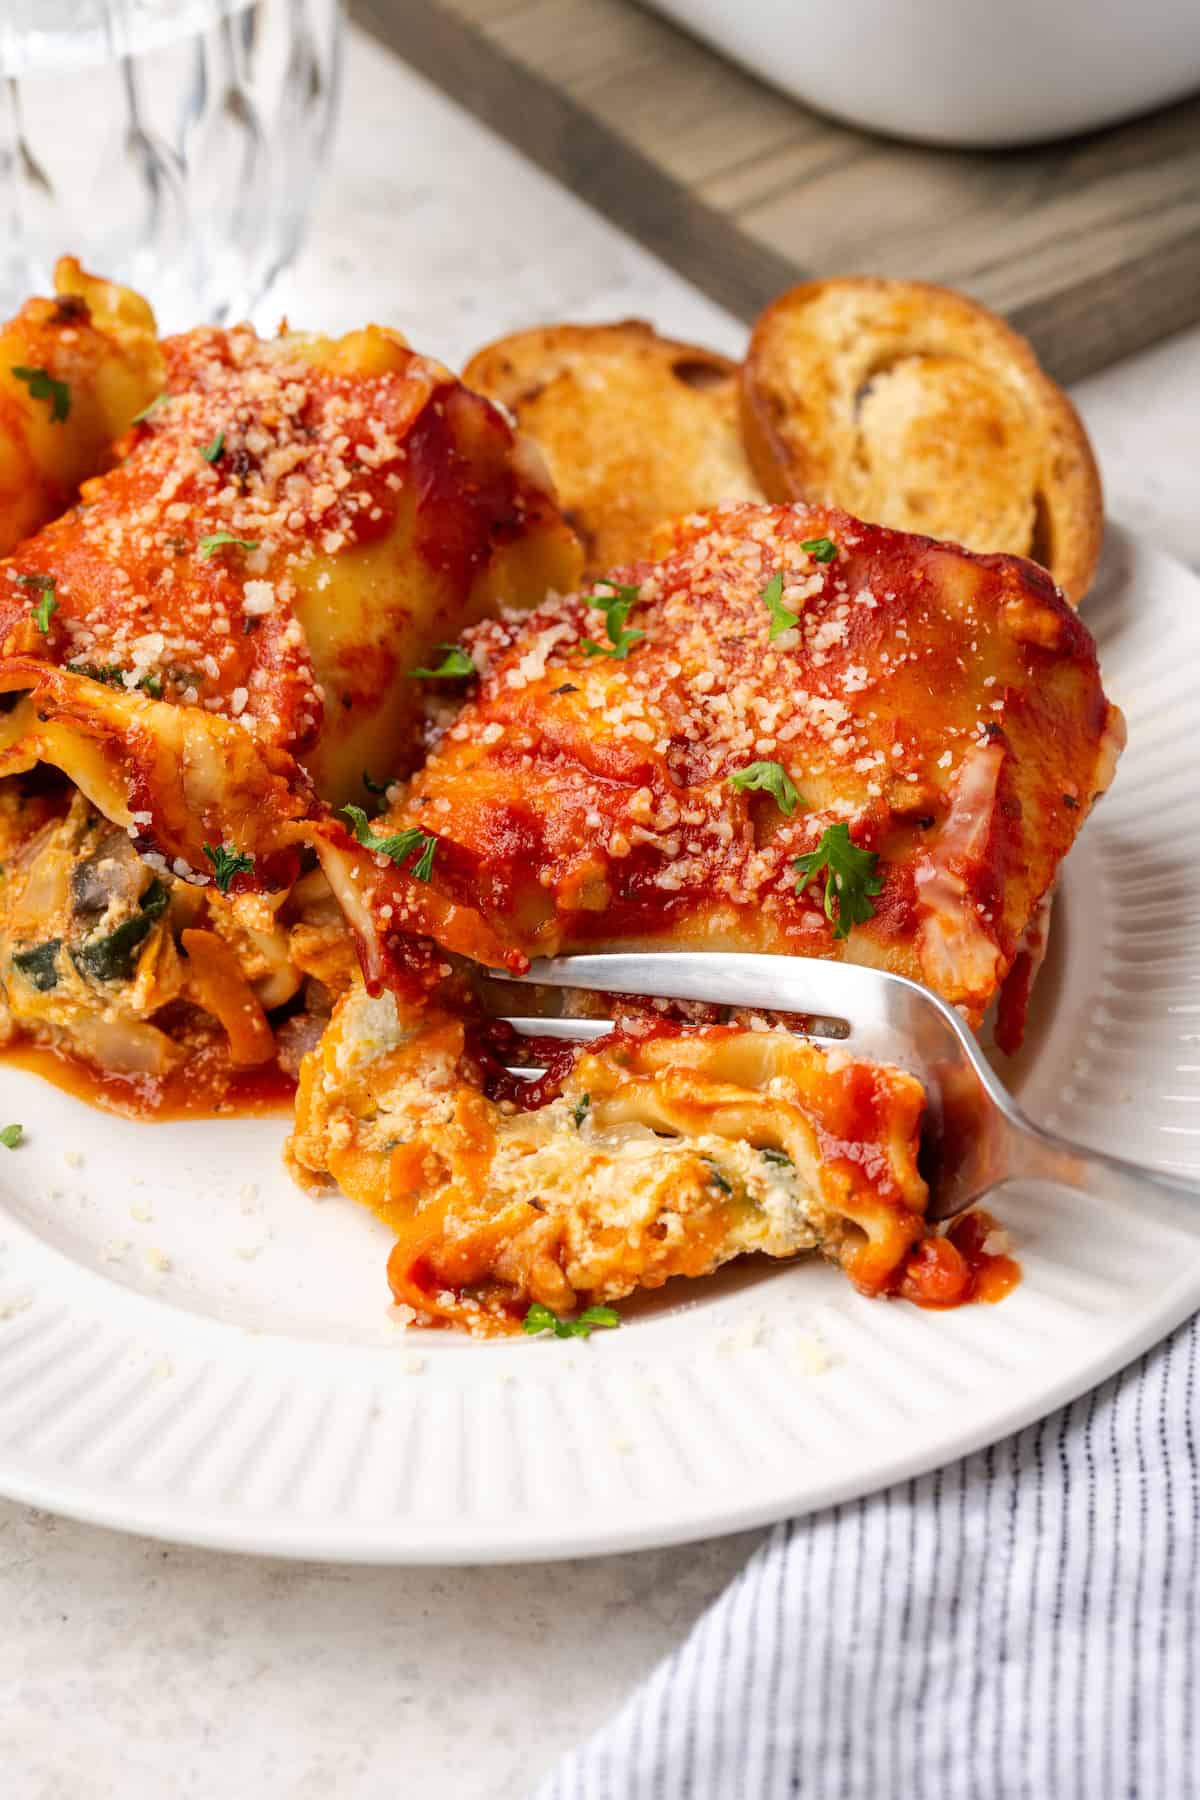 A fork cutting into a baked cheesy vegetable lasagna roll up on a white plate.